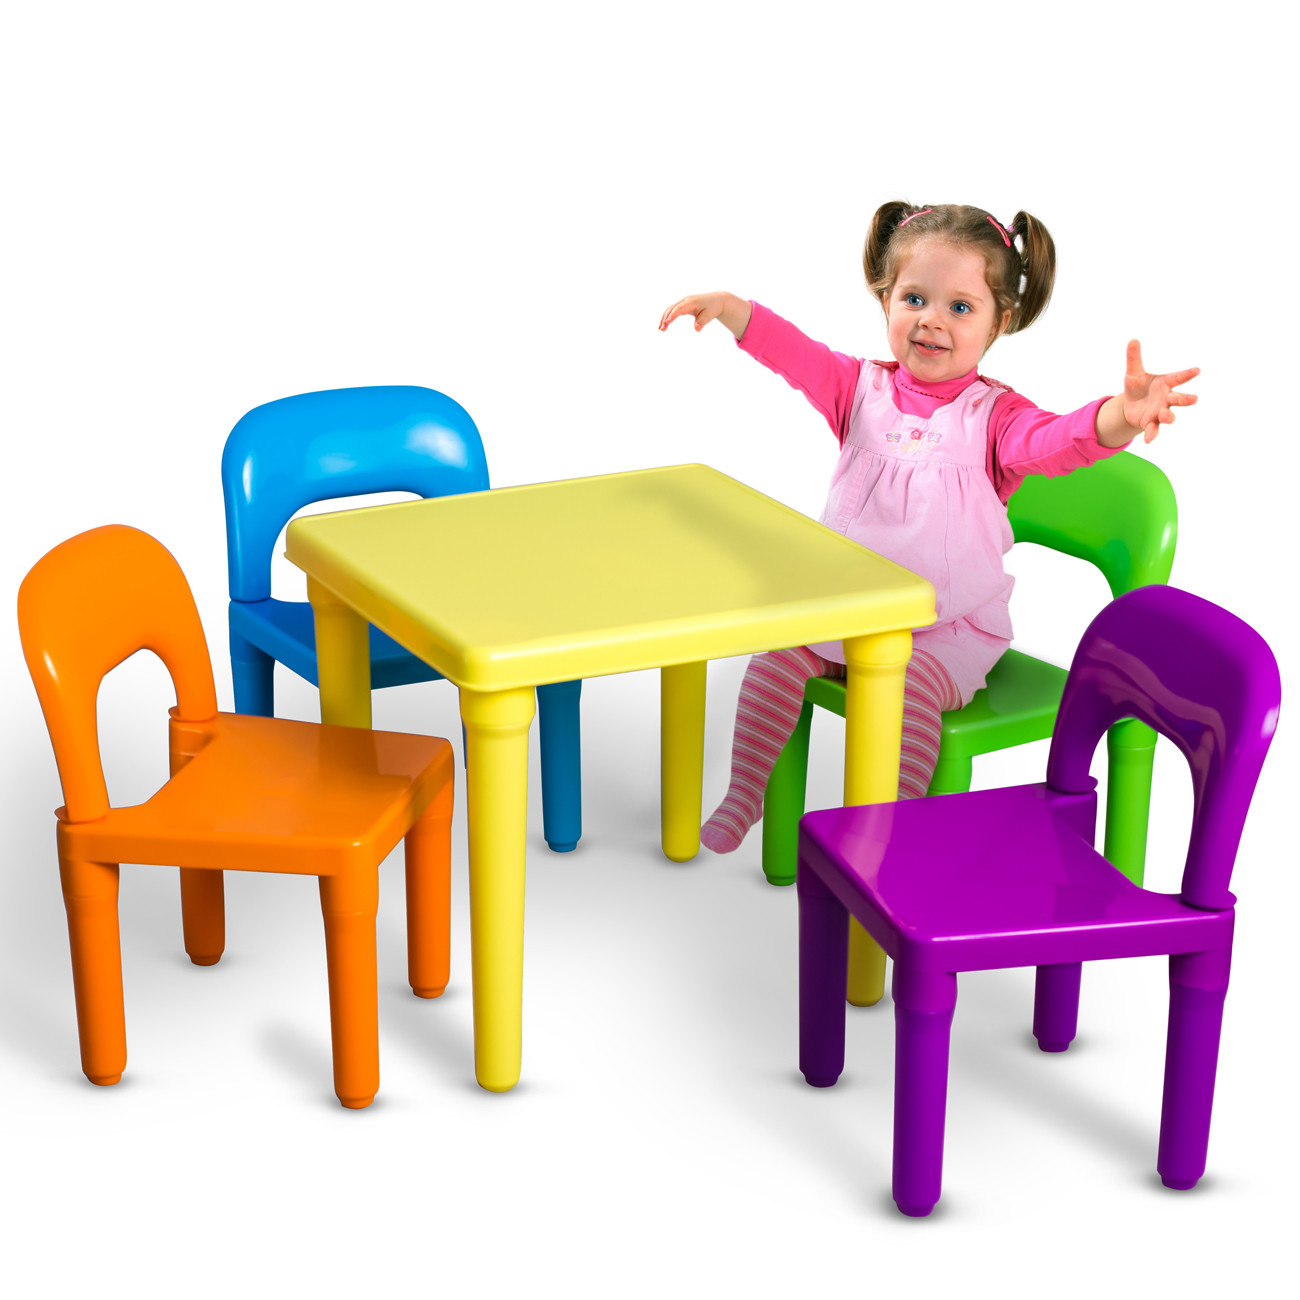 Kids Outdoor Table And Bench
 Kids Table and Chairs Play Set Toddler Child Toy Activity